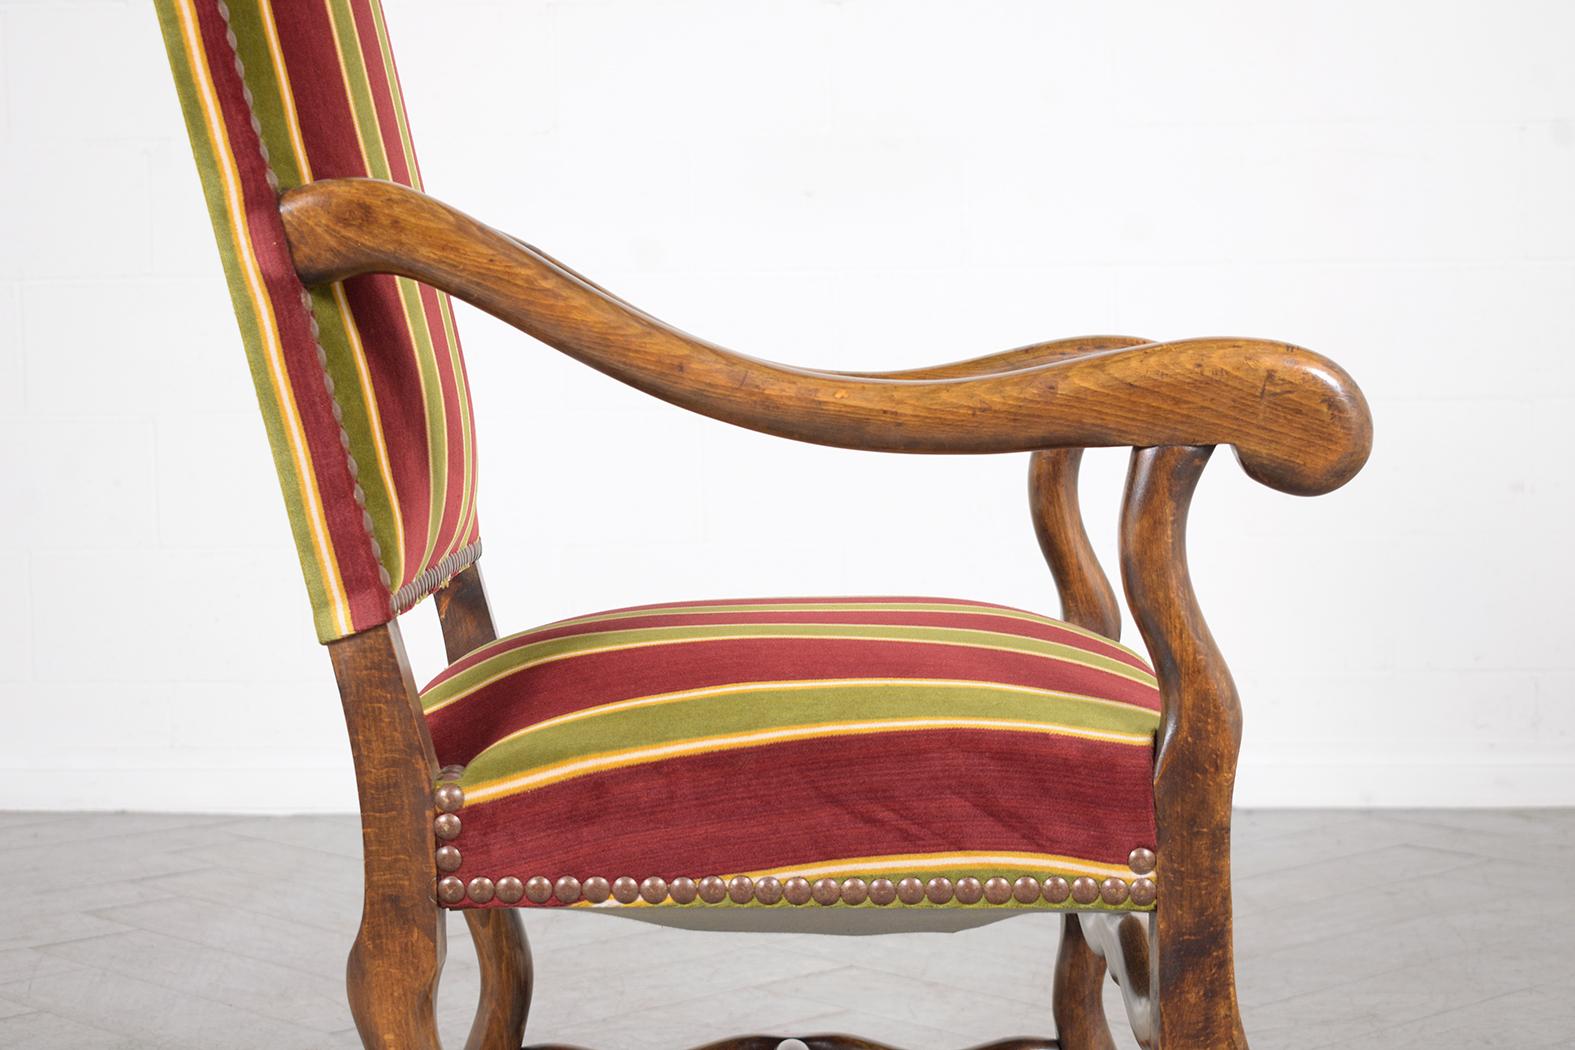 19th Century French Armchairs: Dark Walnut Finish with Striped Velvet Upholstery For Sale 7